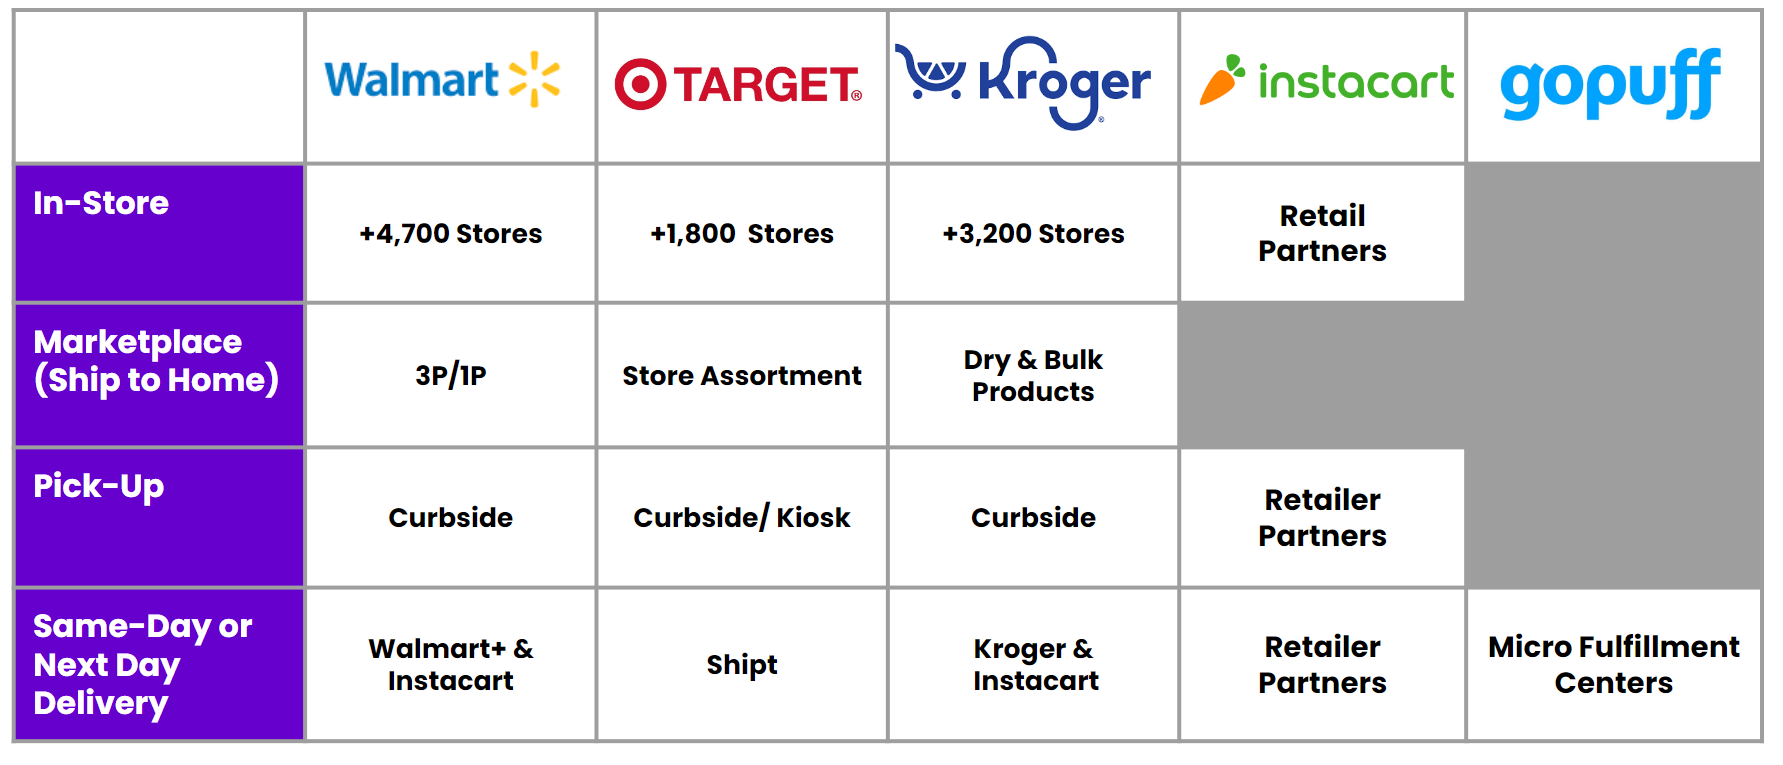 Table showing how customers can shop from grocery retailers like Kroger and Instacart